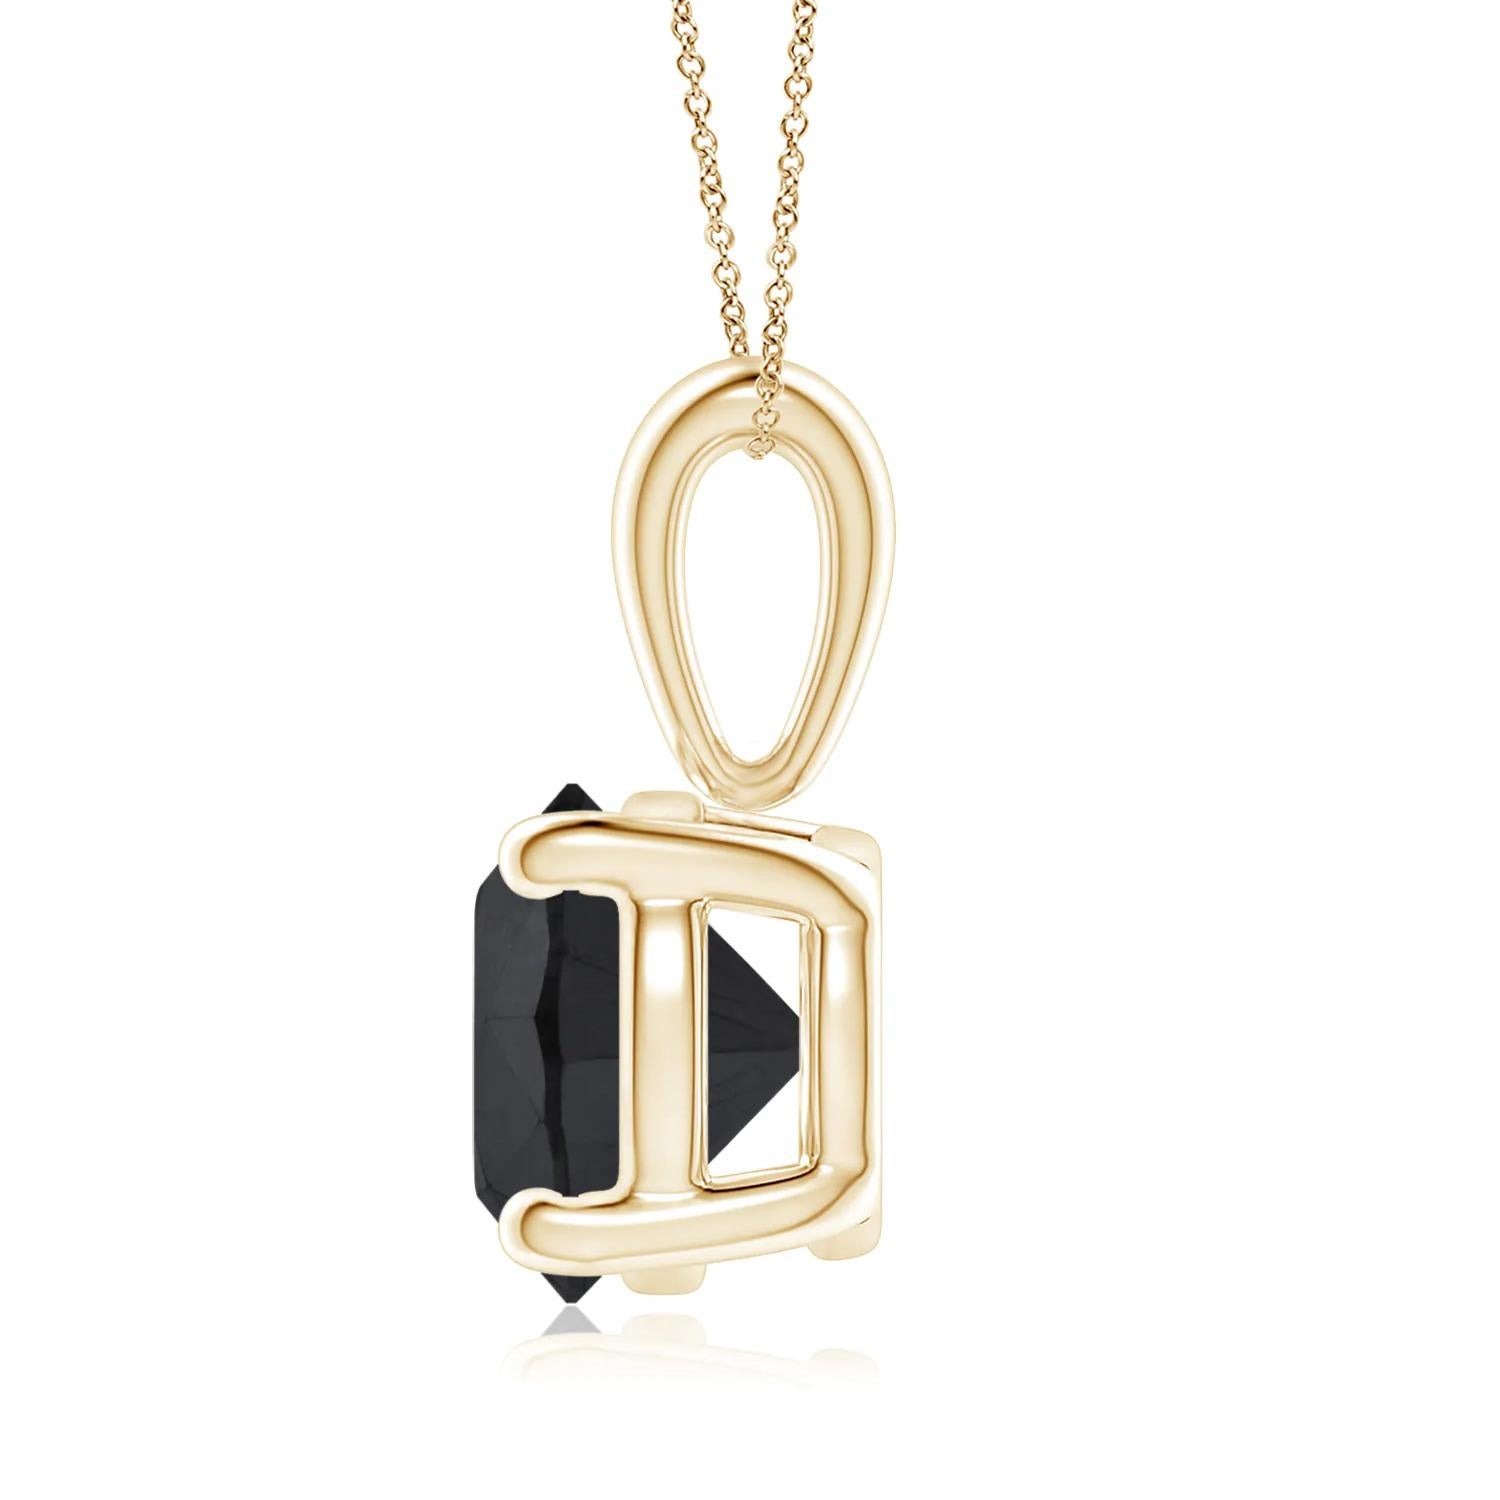 Round Cut 1.29 Carat Round Black Diamond Solitaire Pendant Necklace in 14K Yellow Gold